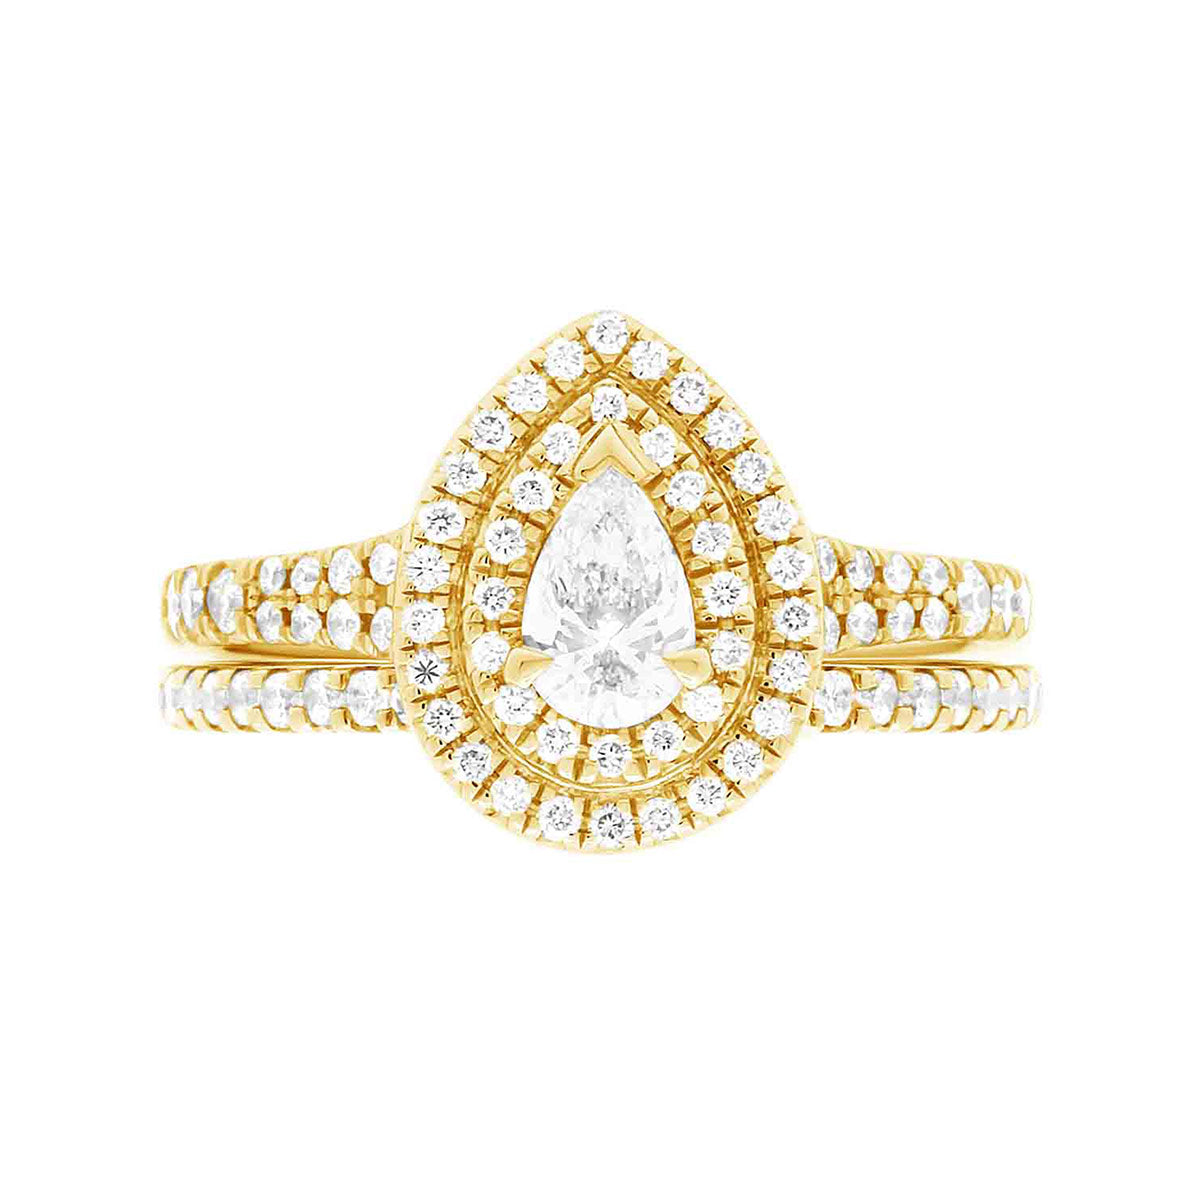 Double Halo Pear Diamond Ring in yellow gold in a vertical position pictured with a matching yellow gold and diamond wedding ring